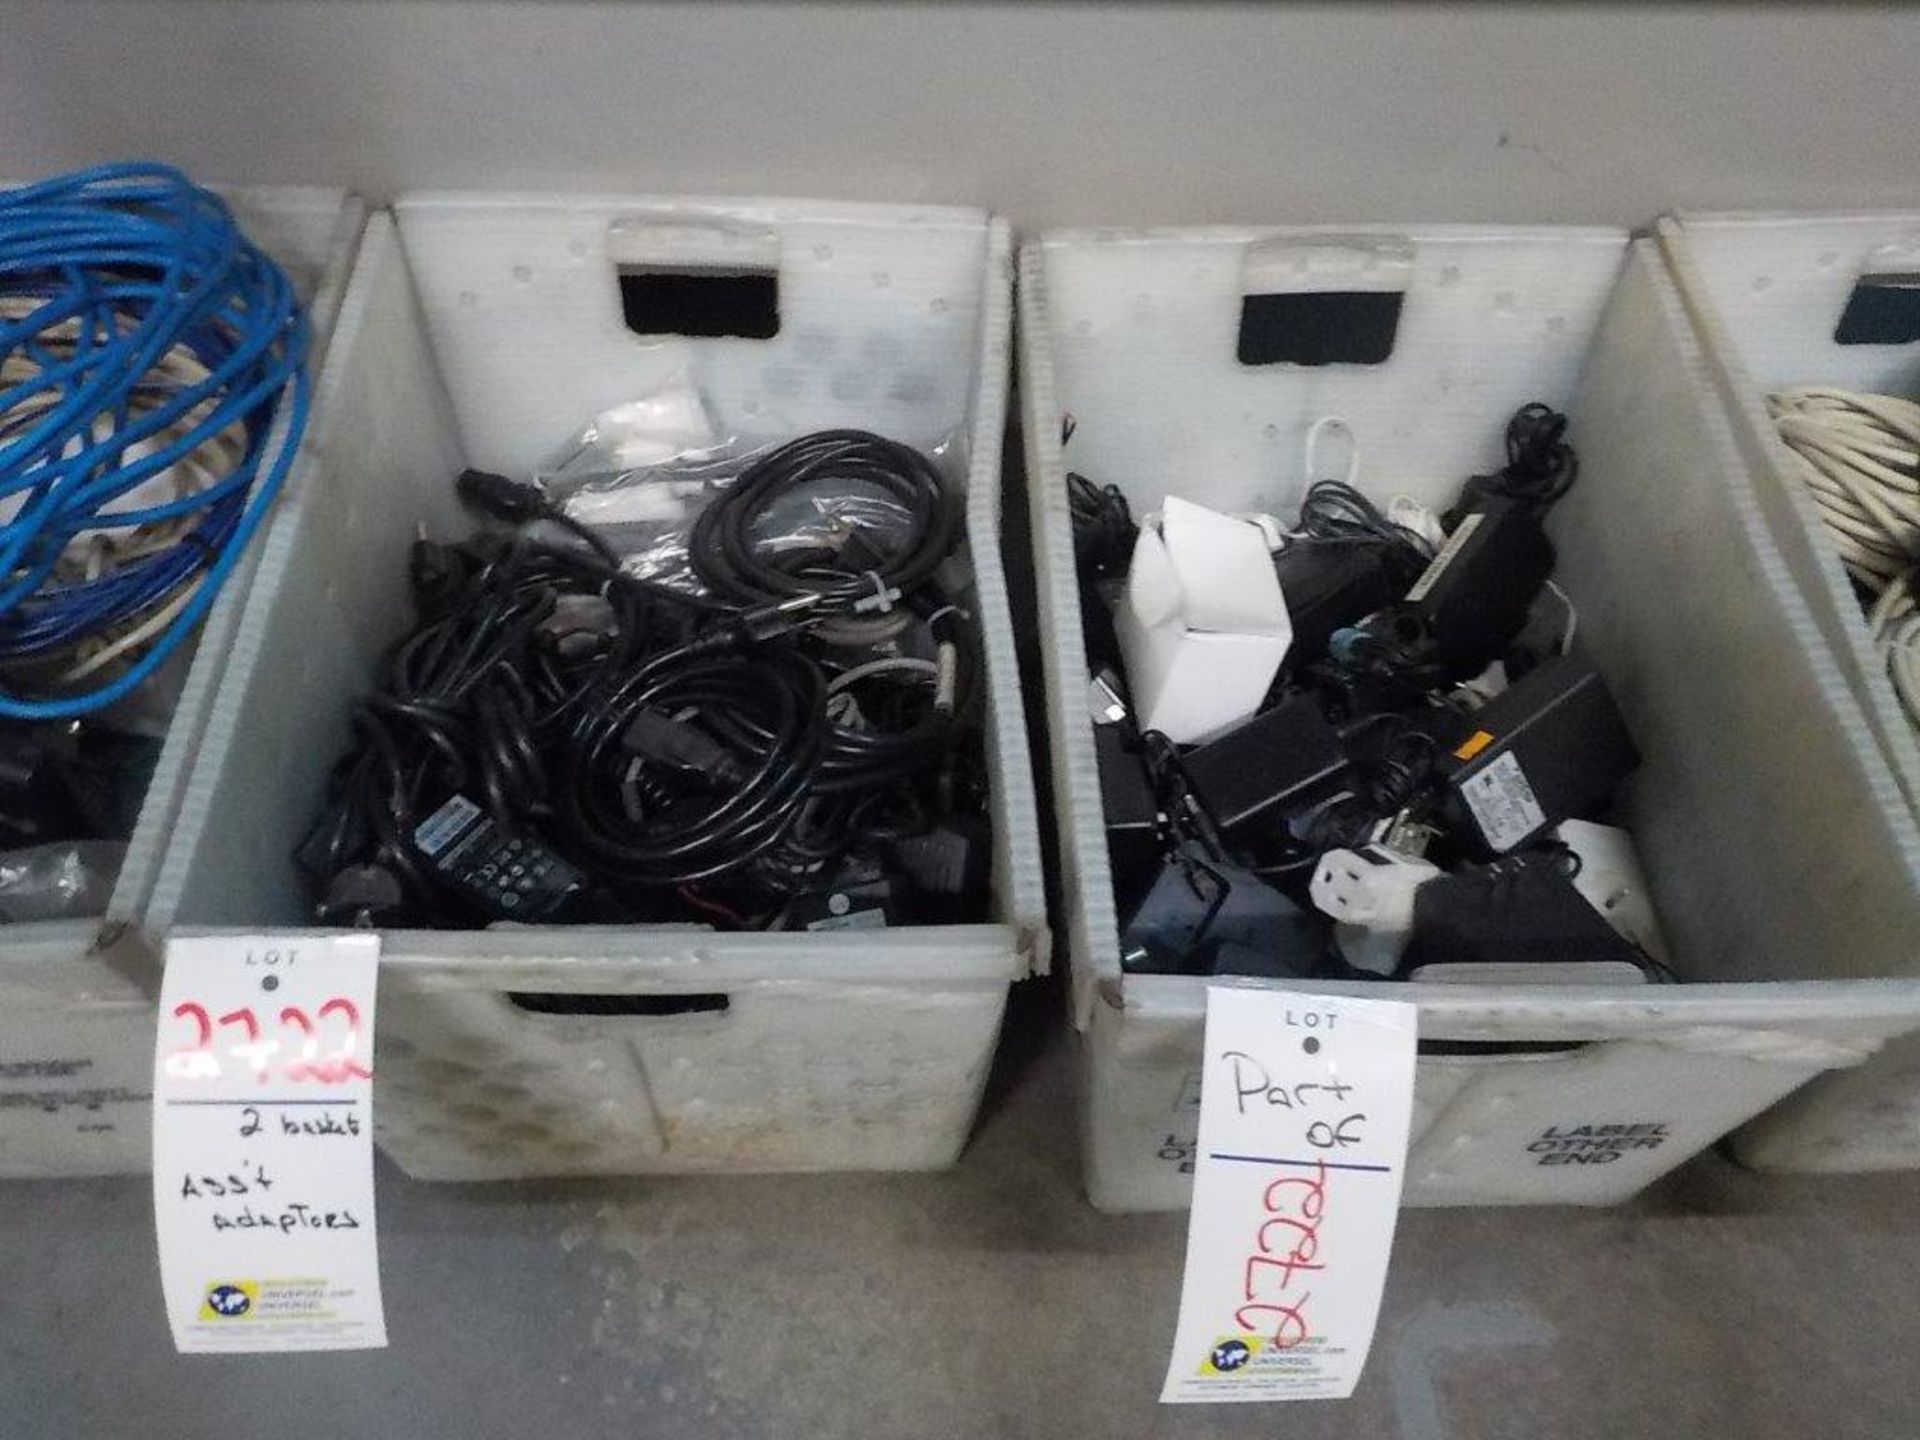 ASSORTED ADAPTERS (BASKETS)